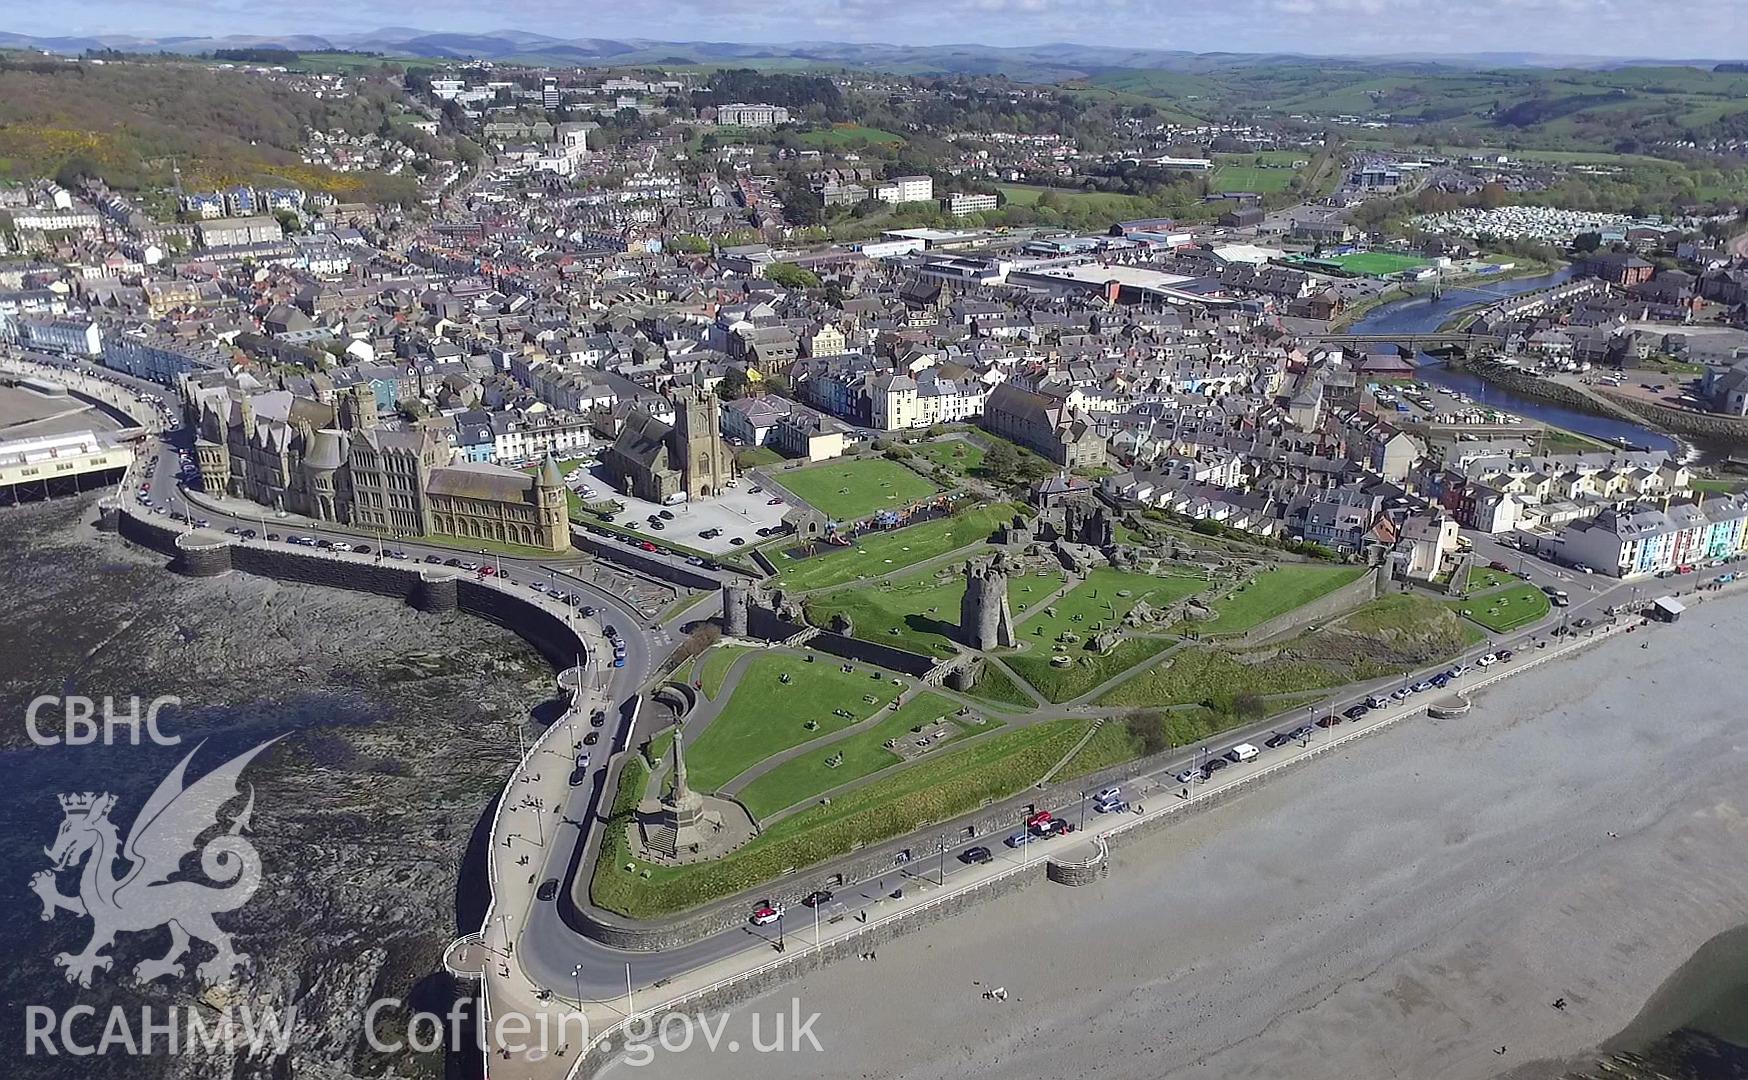 Colour photo showing Aberystwyth Castle, produced by  Paul R. Davis,  14th May 2017.